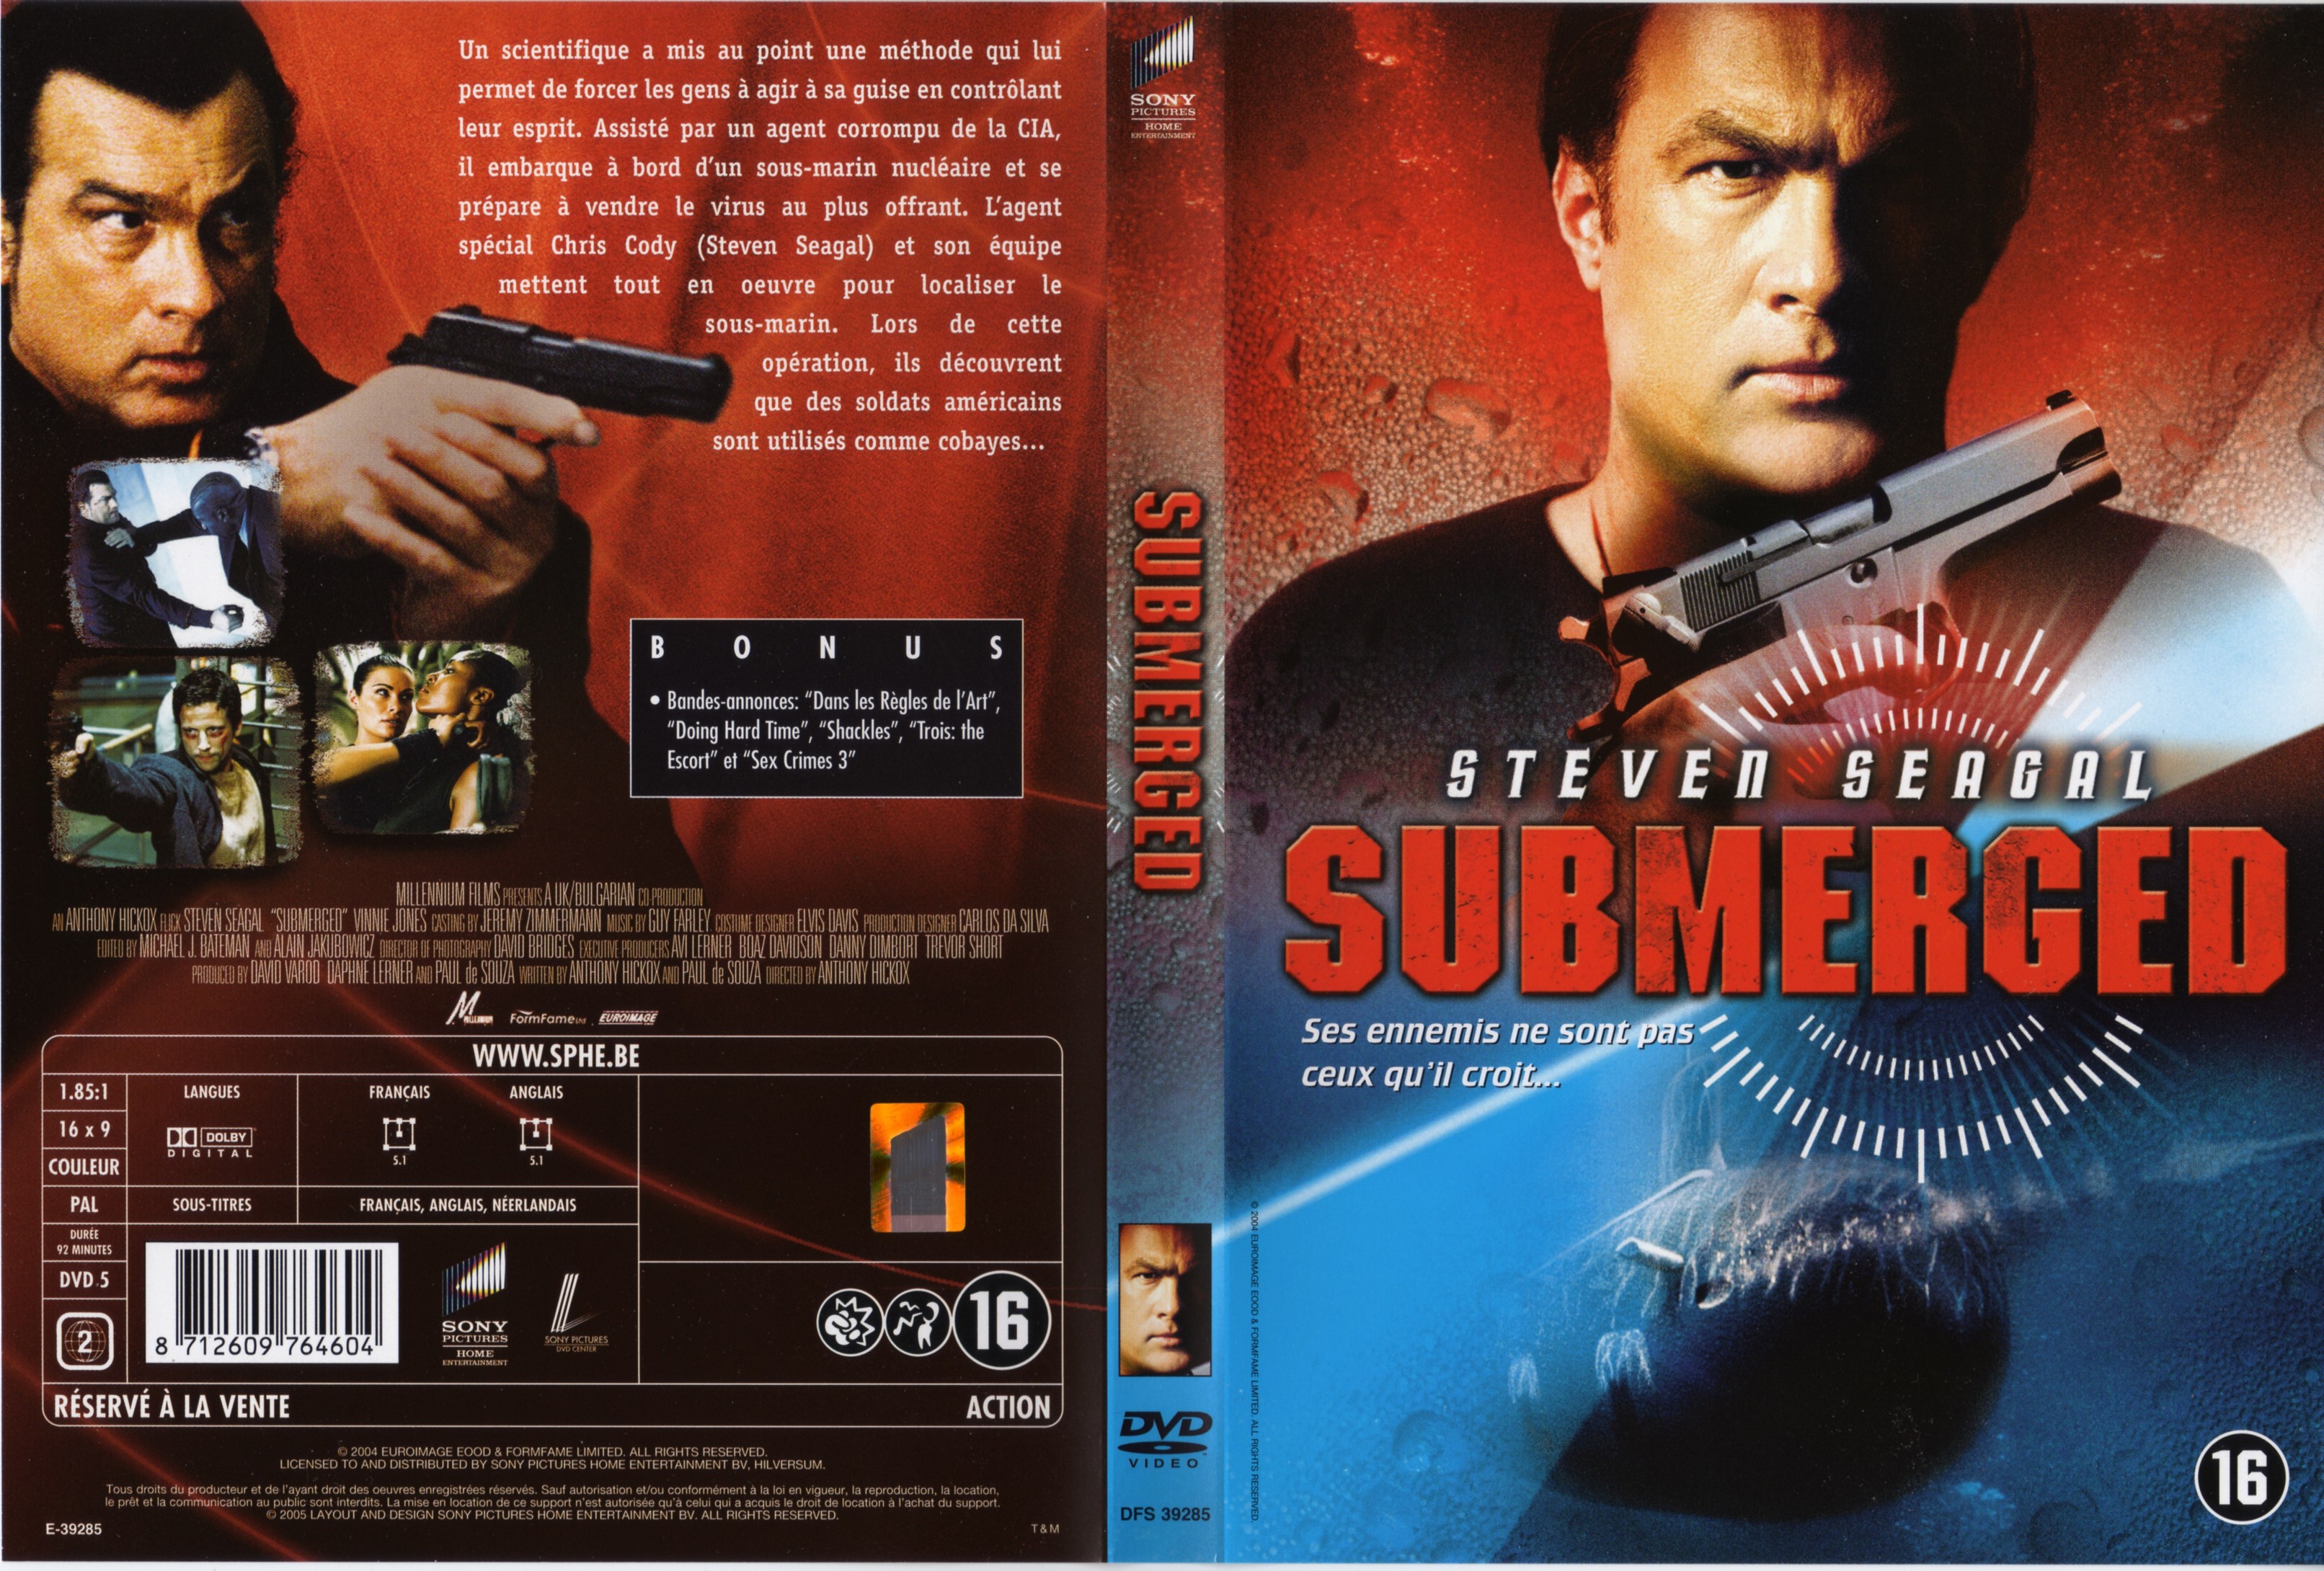 Jaquette DVD Submerged